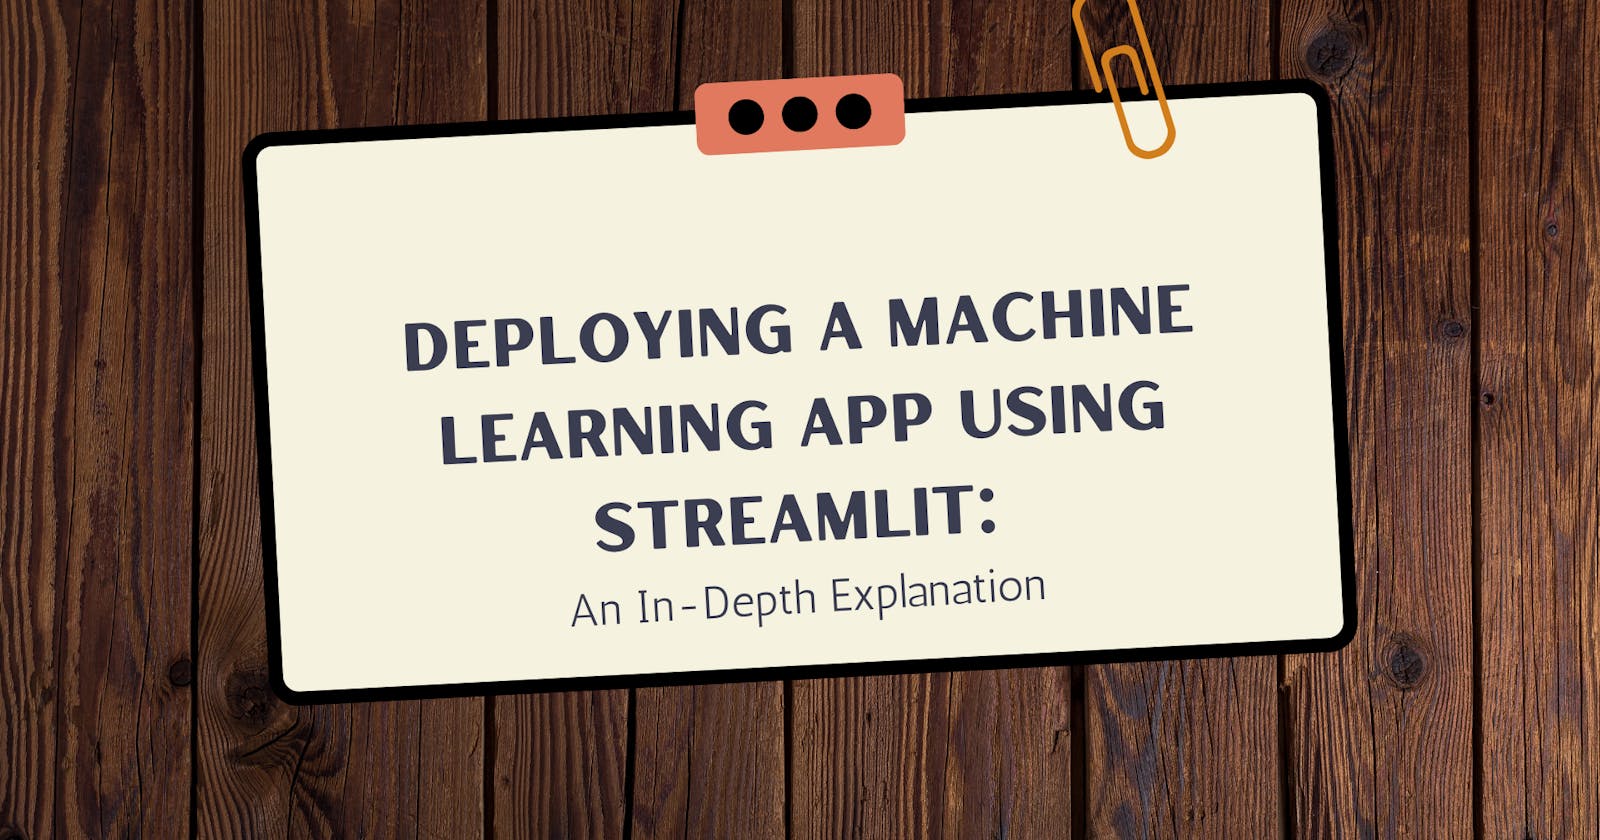 Deploying a Machine Learning App Using Streamlit: An In-Depth Explanation